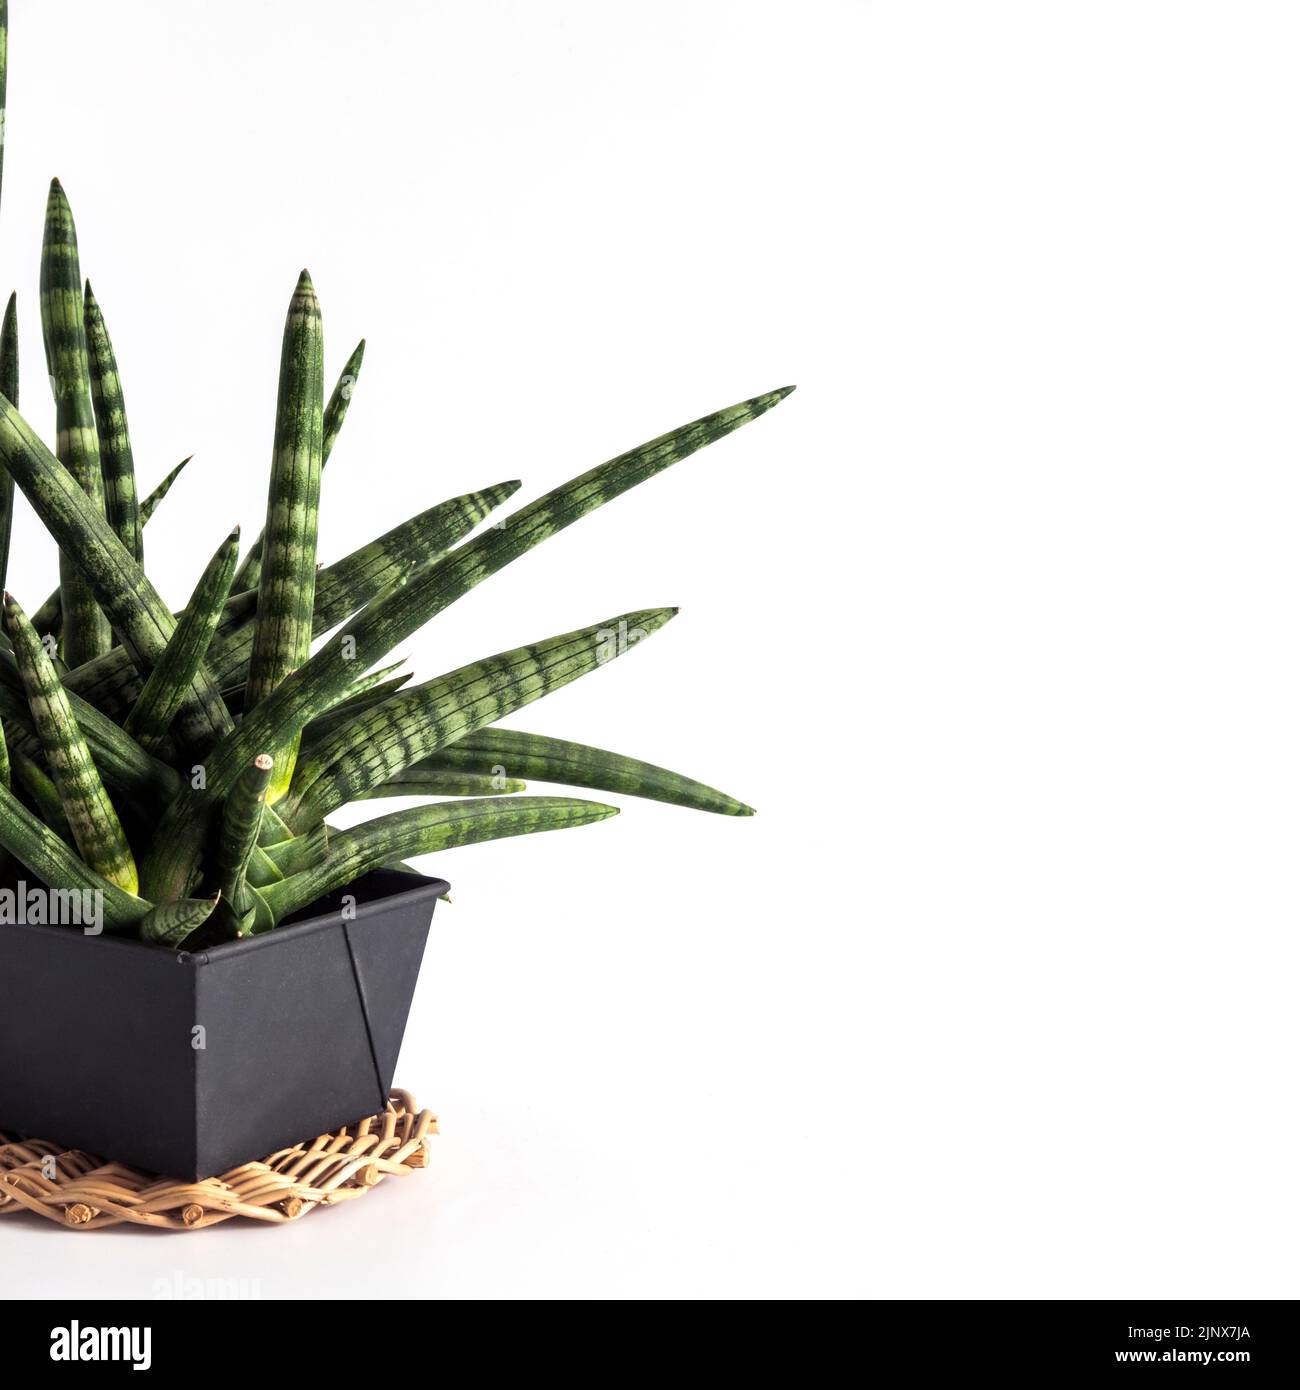 Potted Sansevieria cylindrica var. patula (also known as the cylindrical snake plant, African spear or spear sansevieria, is a flowering succulent pla Stock Photo